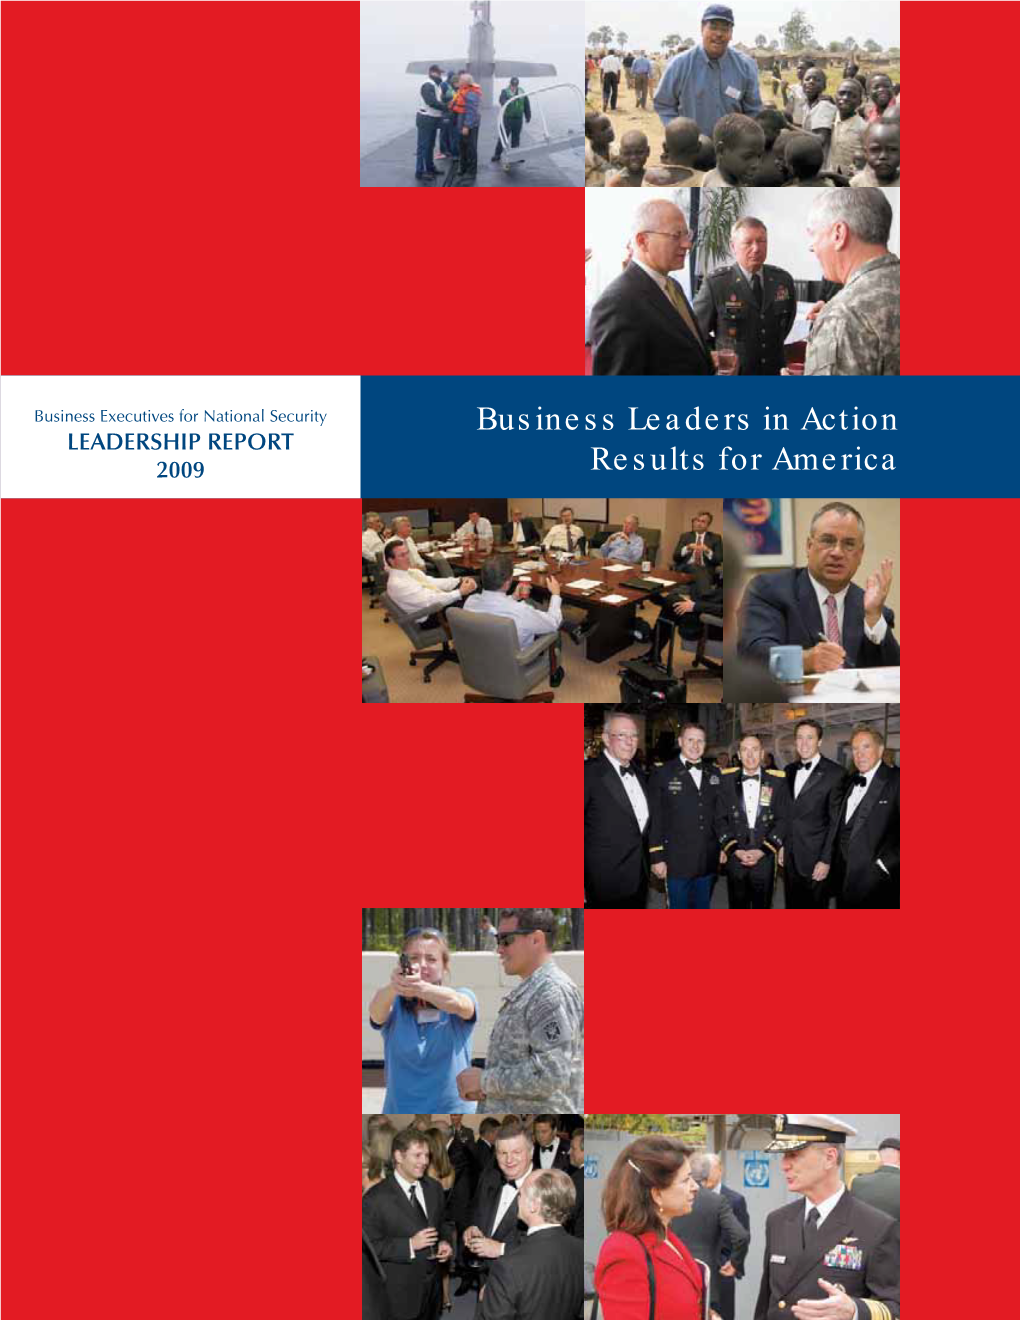 Business Leaders in Action Results for America